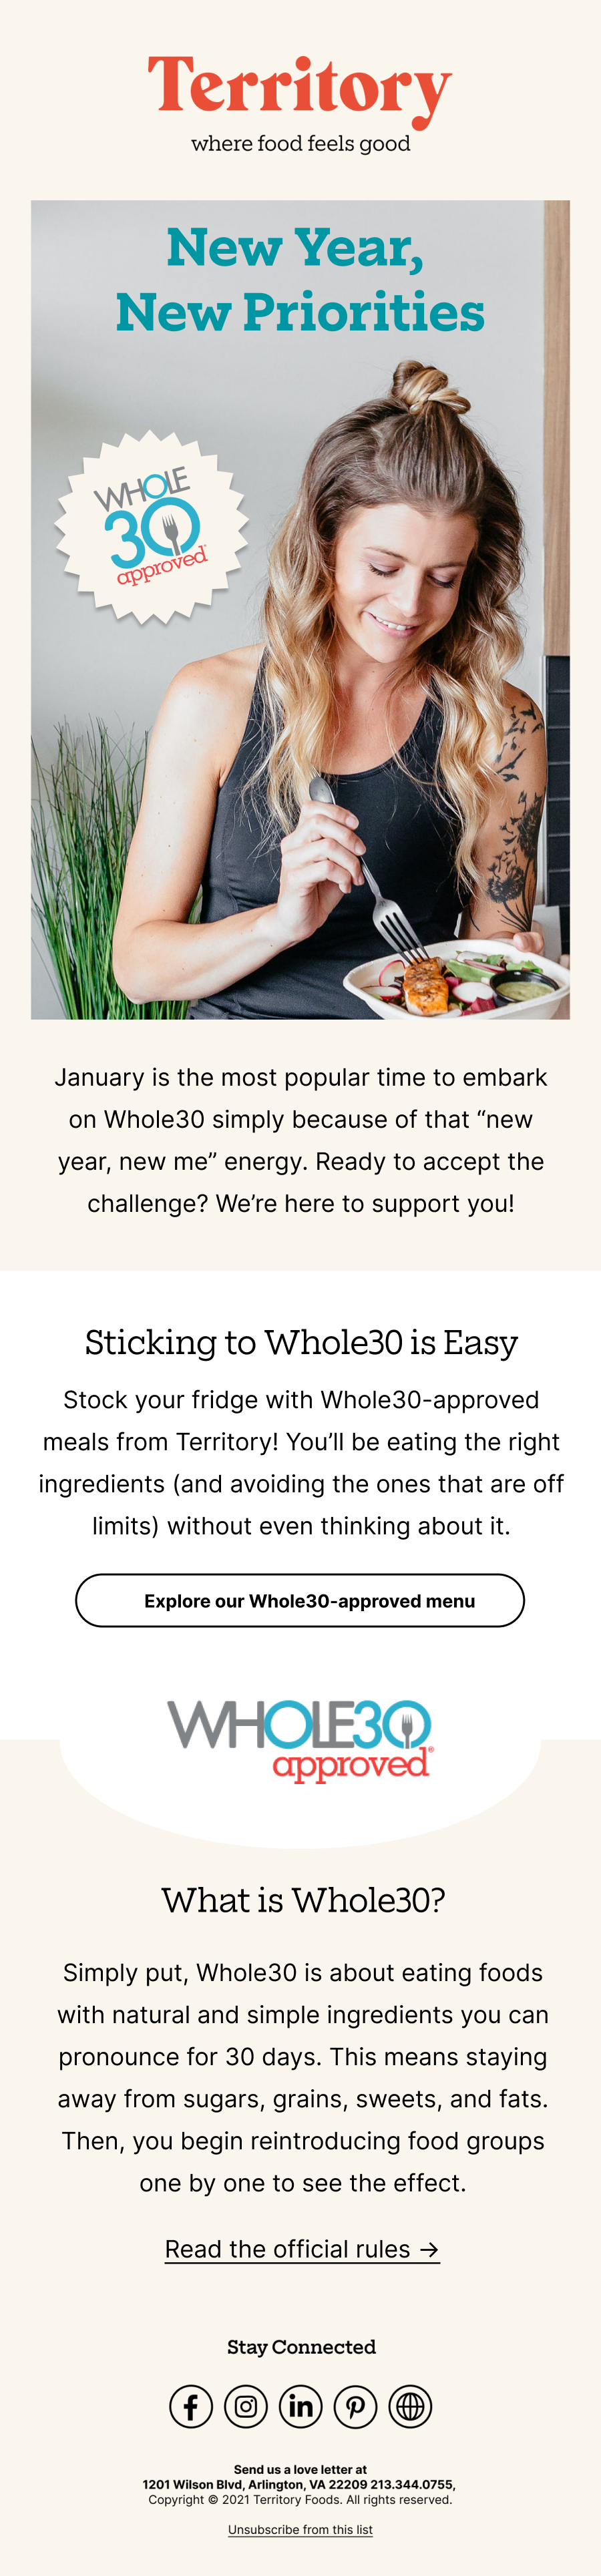 Whole30_Reminder_1226.png